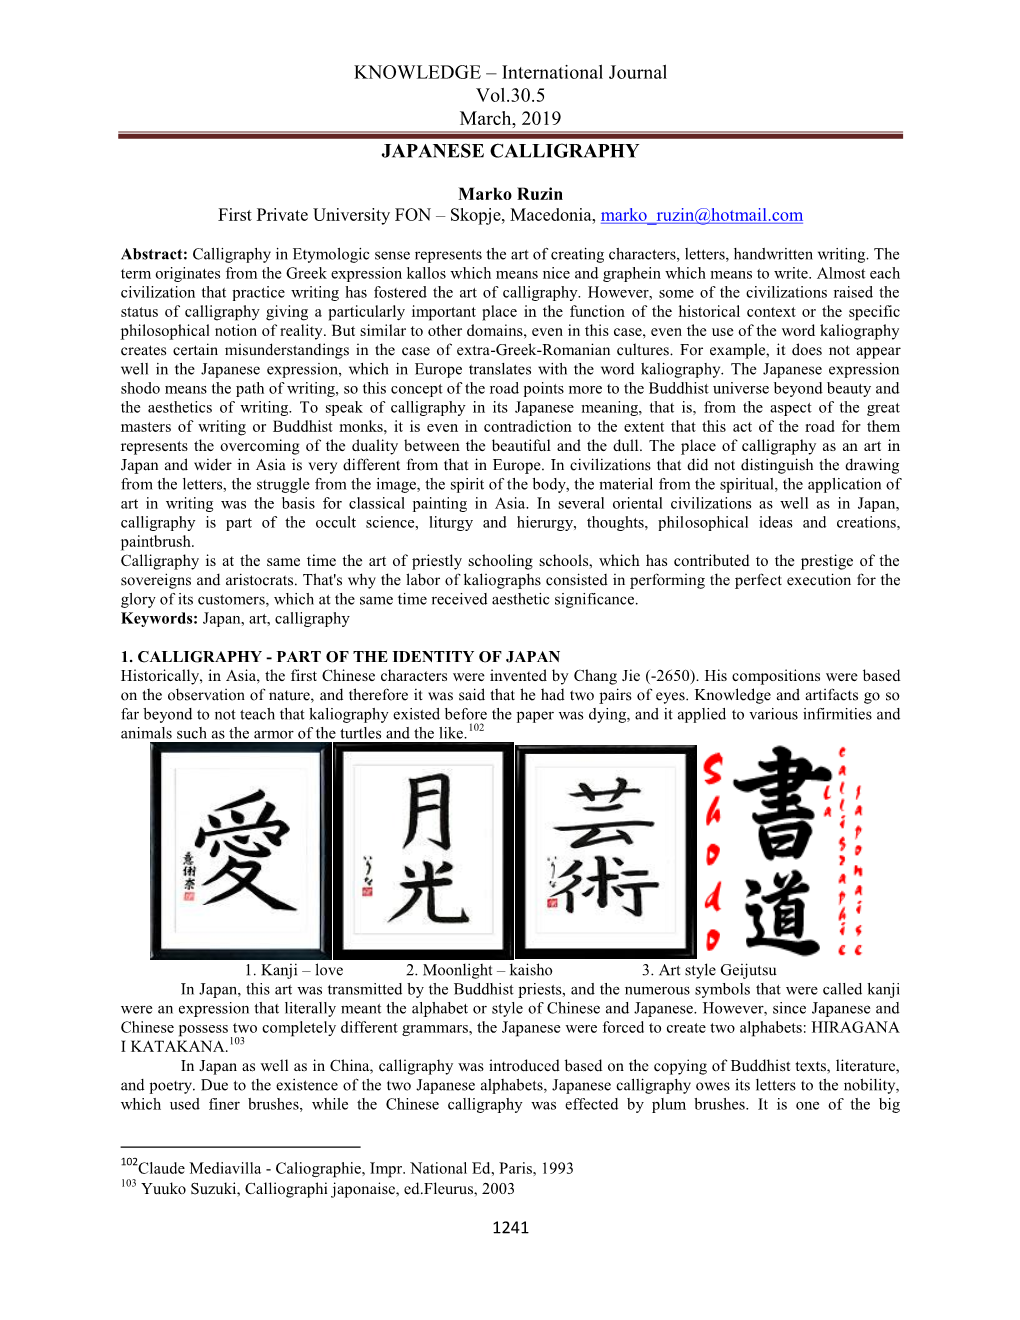 International Journal Vol.30.5 March, 2019 JAPANESE CALLIGRAPHY